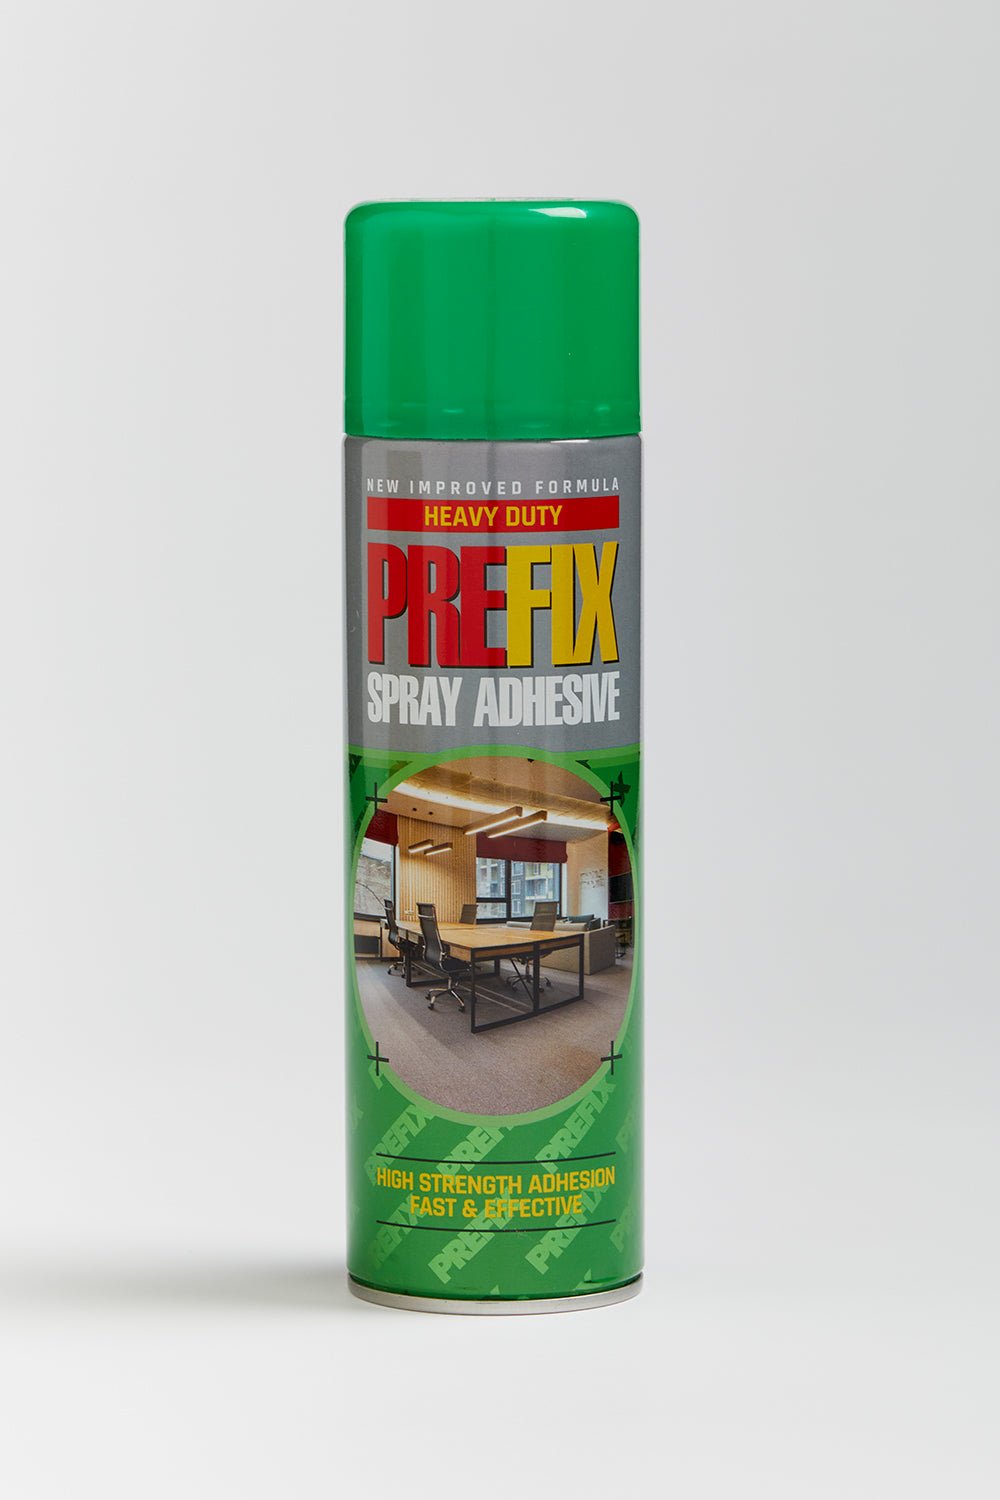 Contact Spray Adhesive can with green packaging and lid. "Heavy Duty, Pre-fix spray adhesive, high strength adhesion, fast and effective"